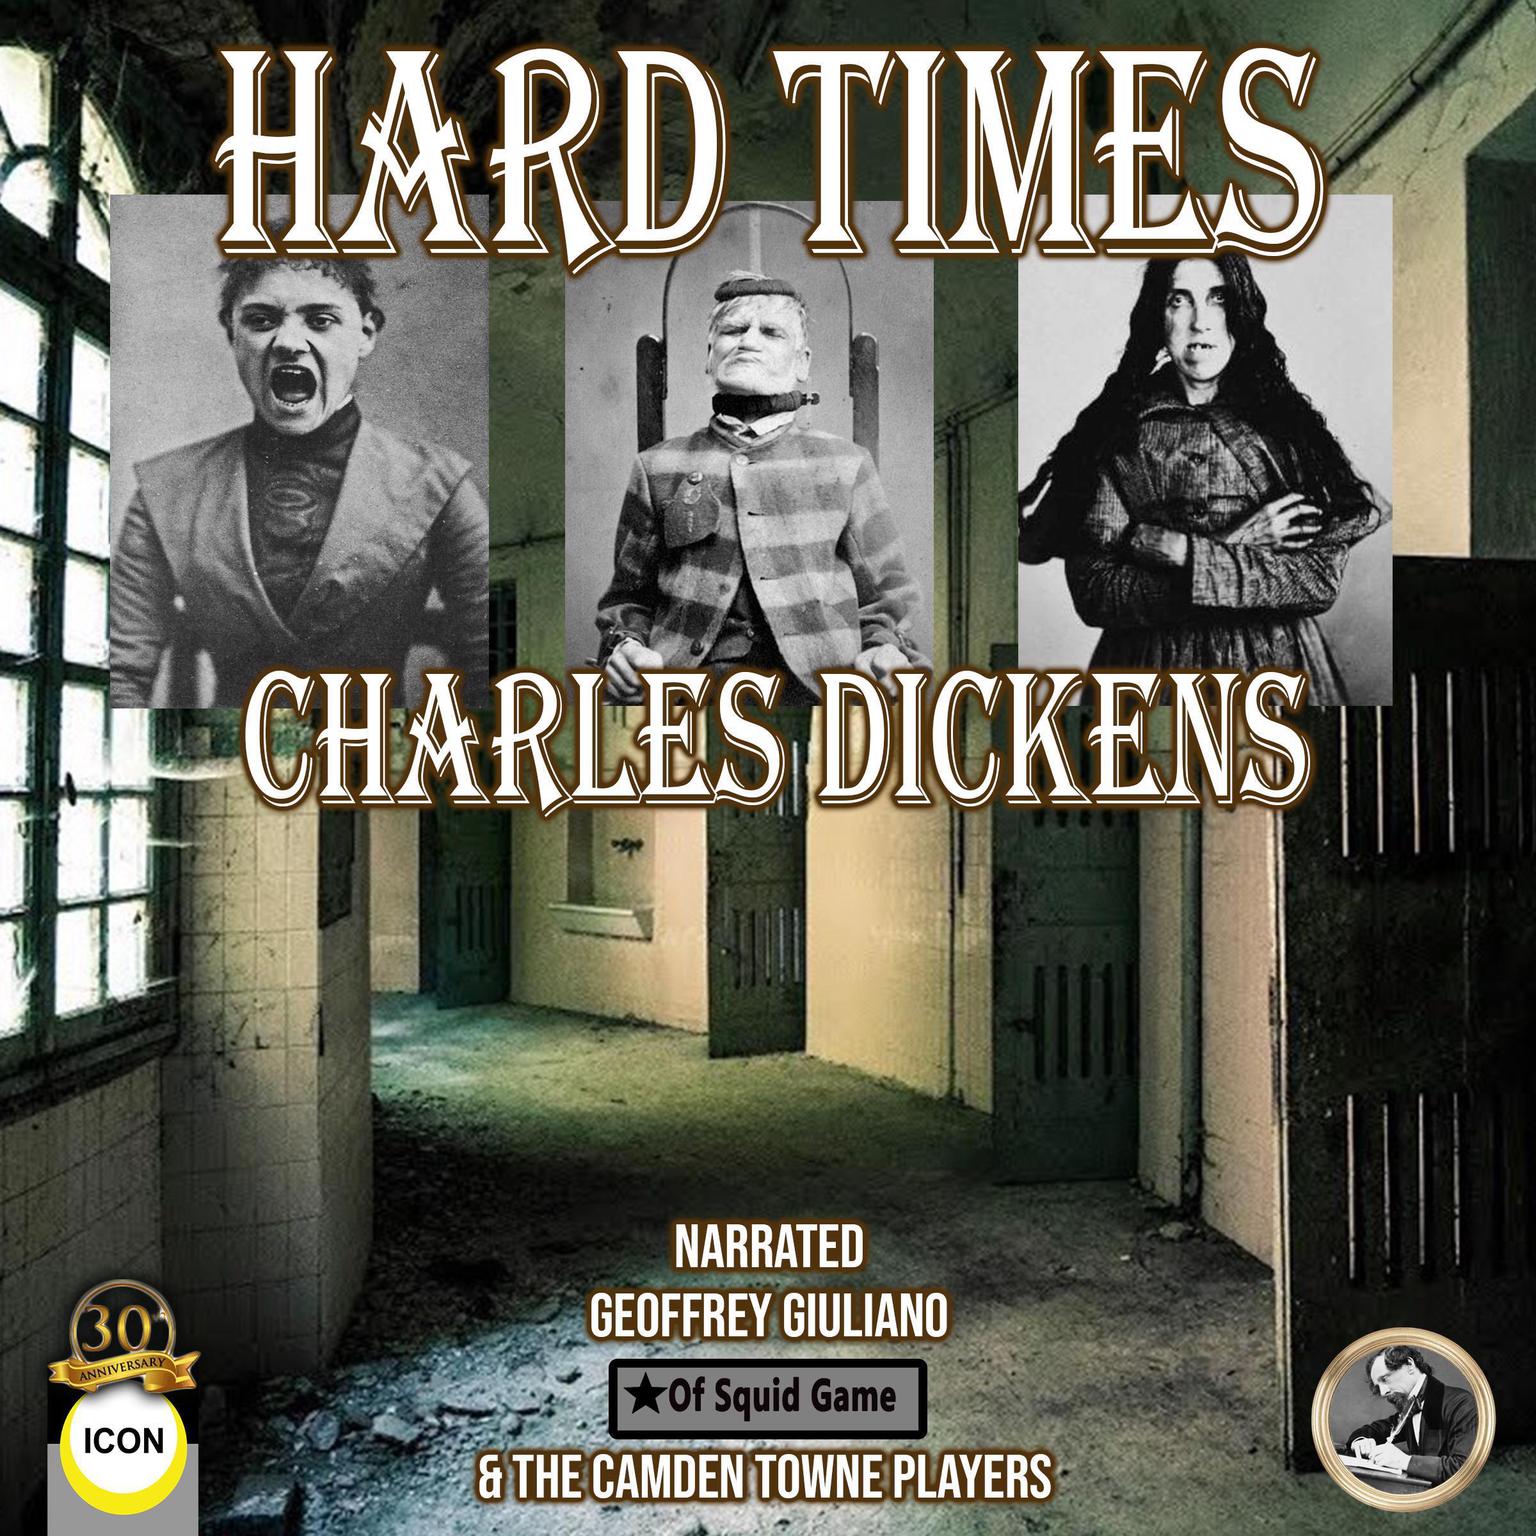 Hard Times Audiobook, by Charles Dickens